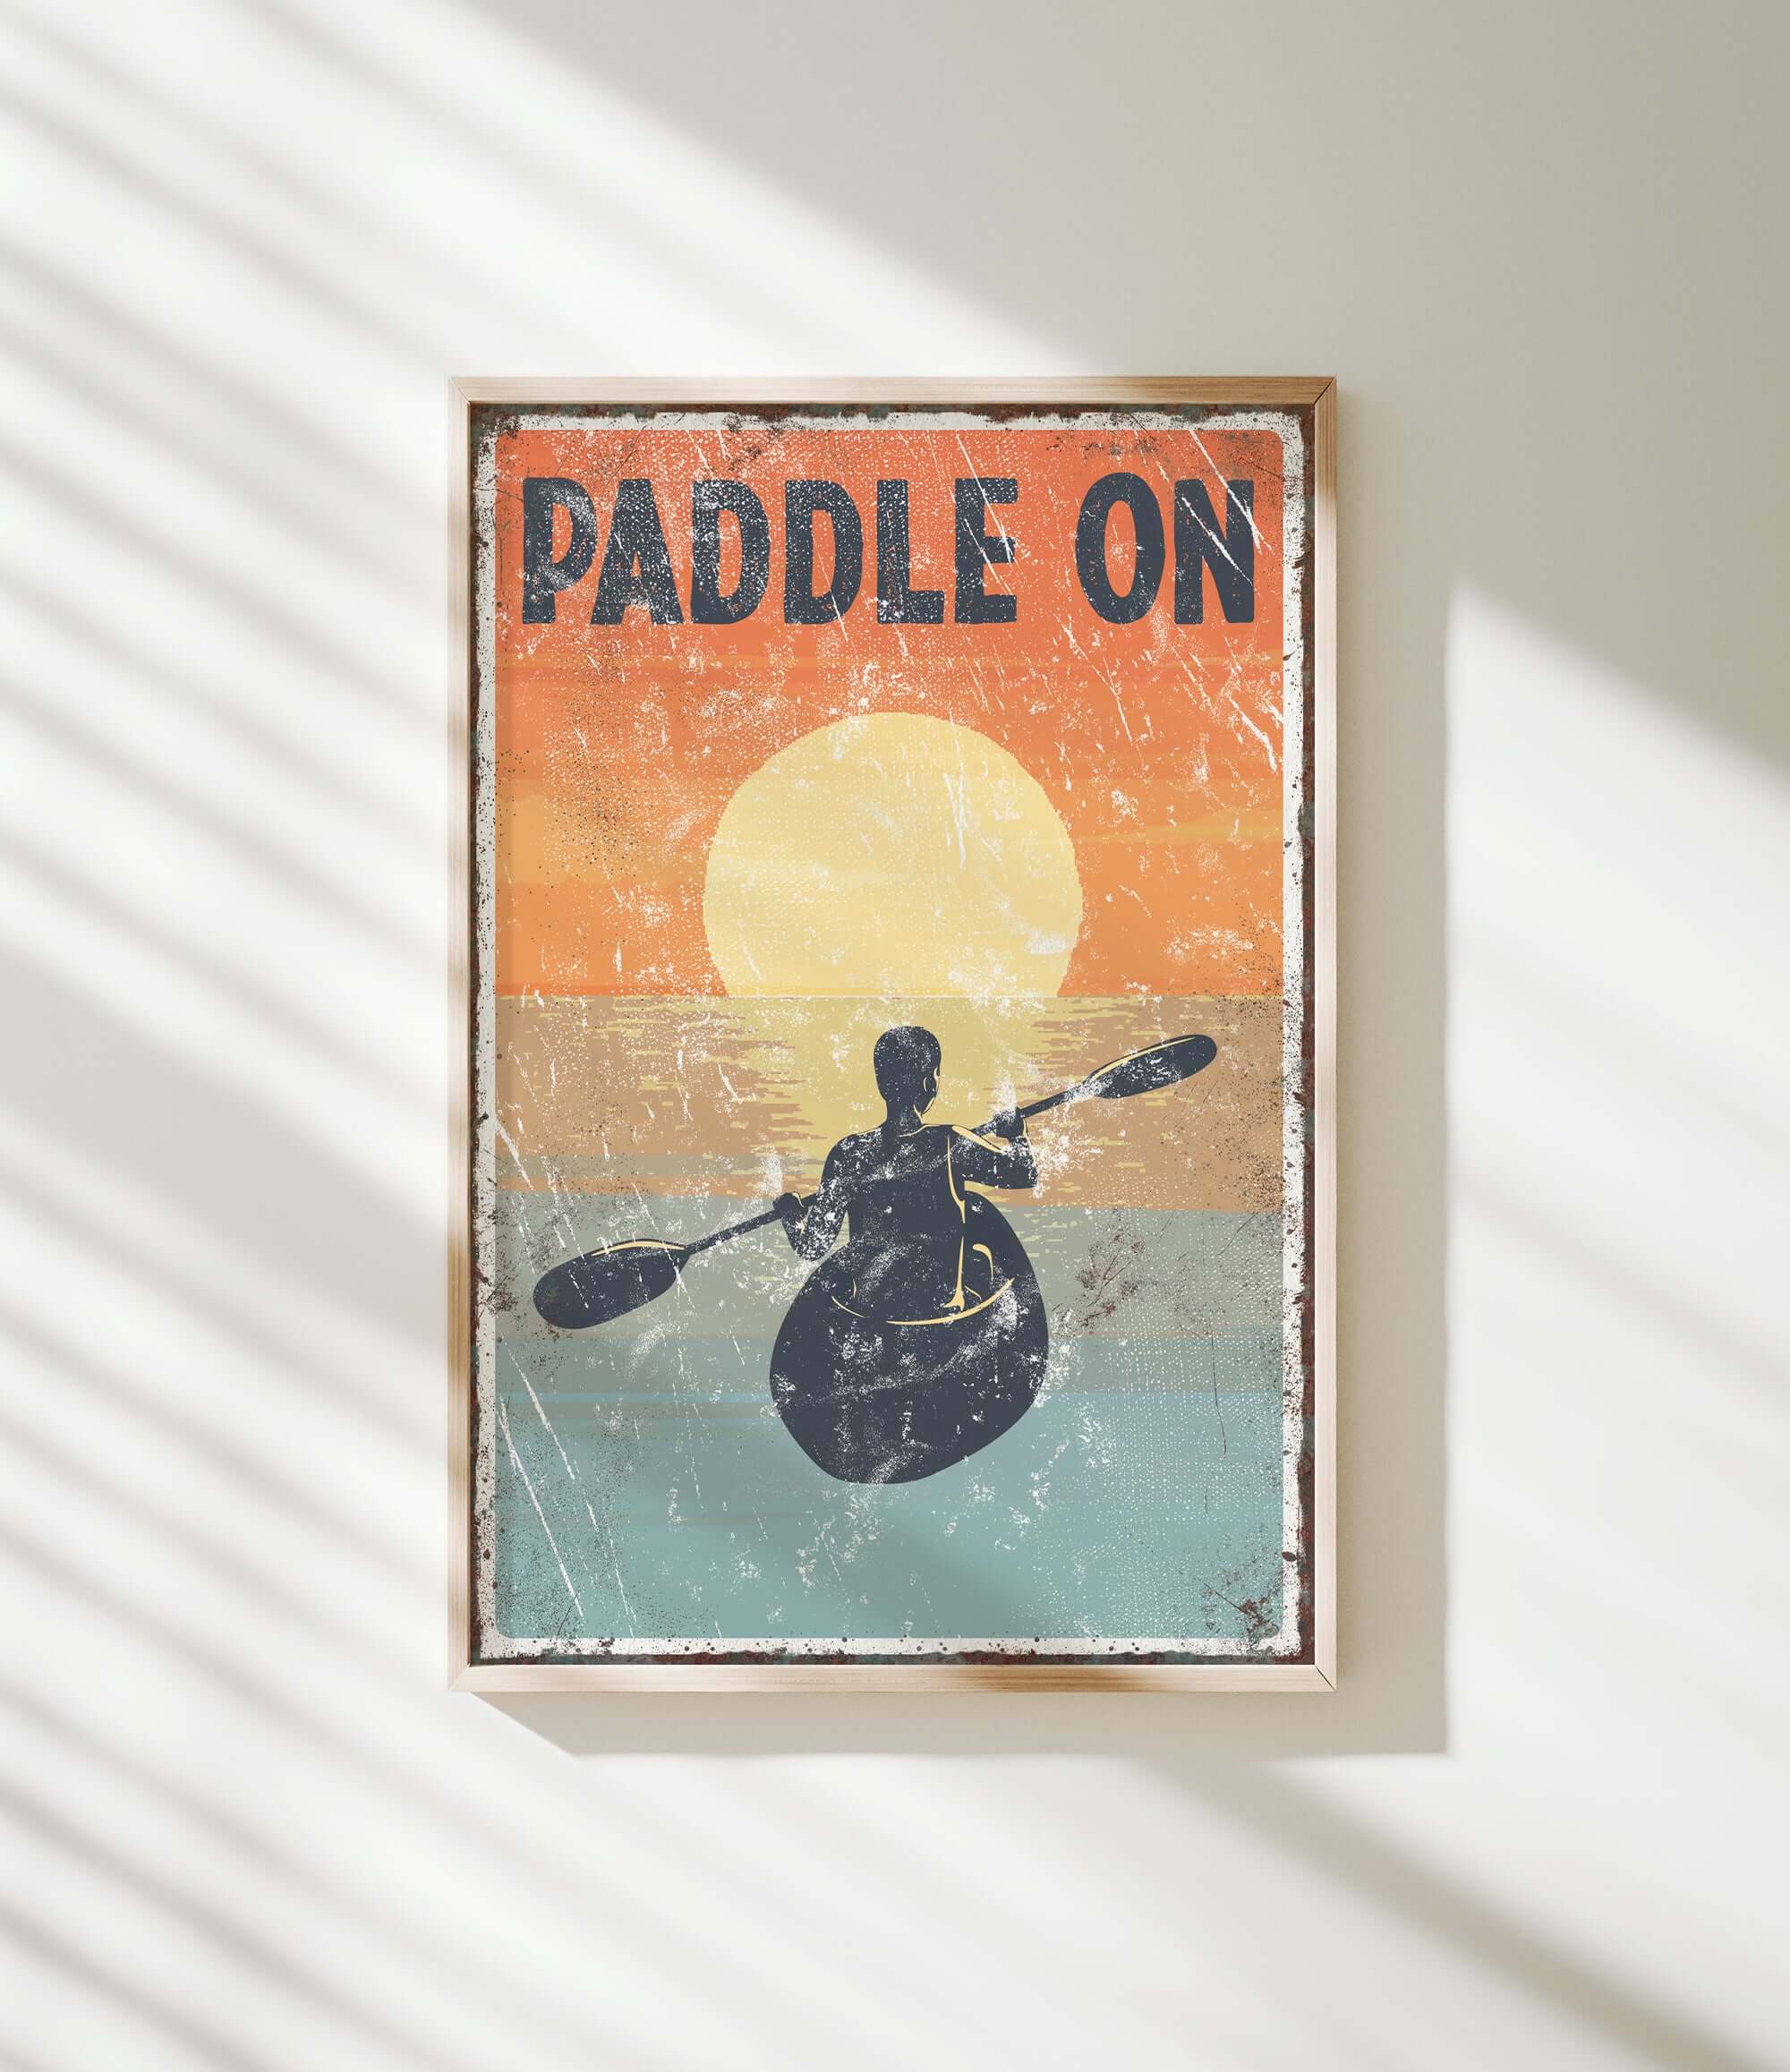 a vintage paddle on poster hangs on a wall